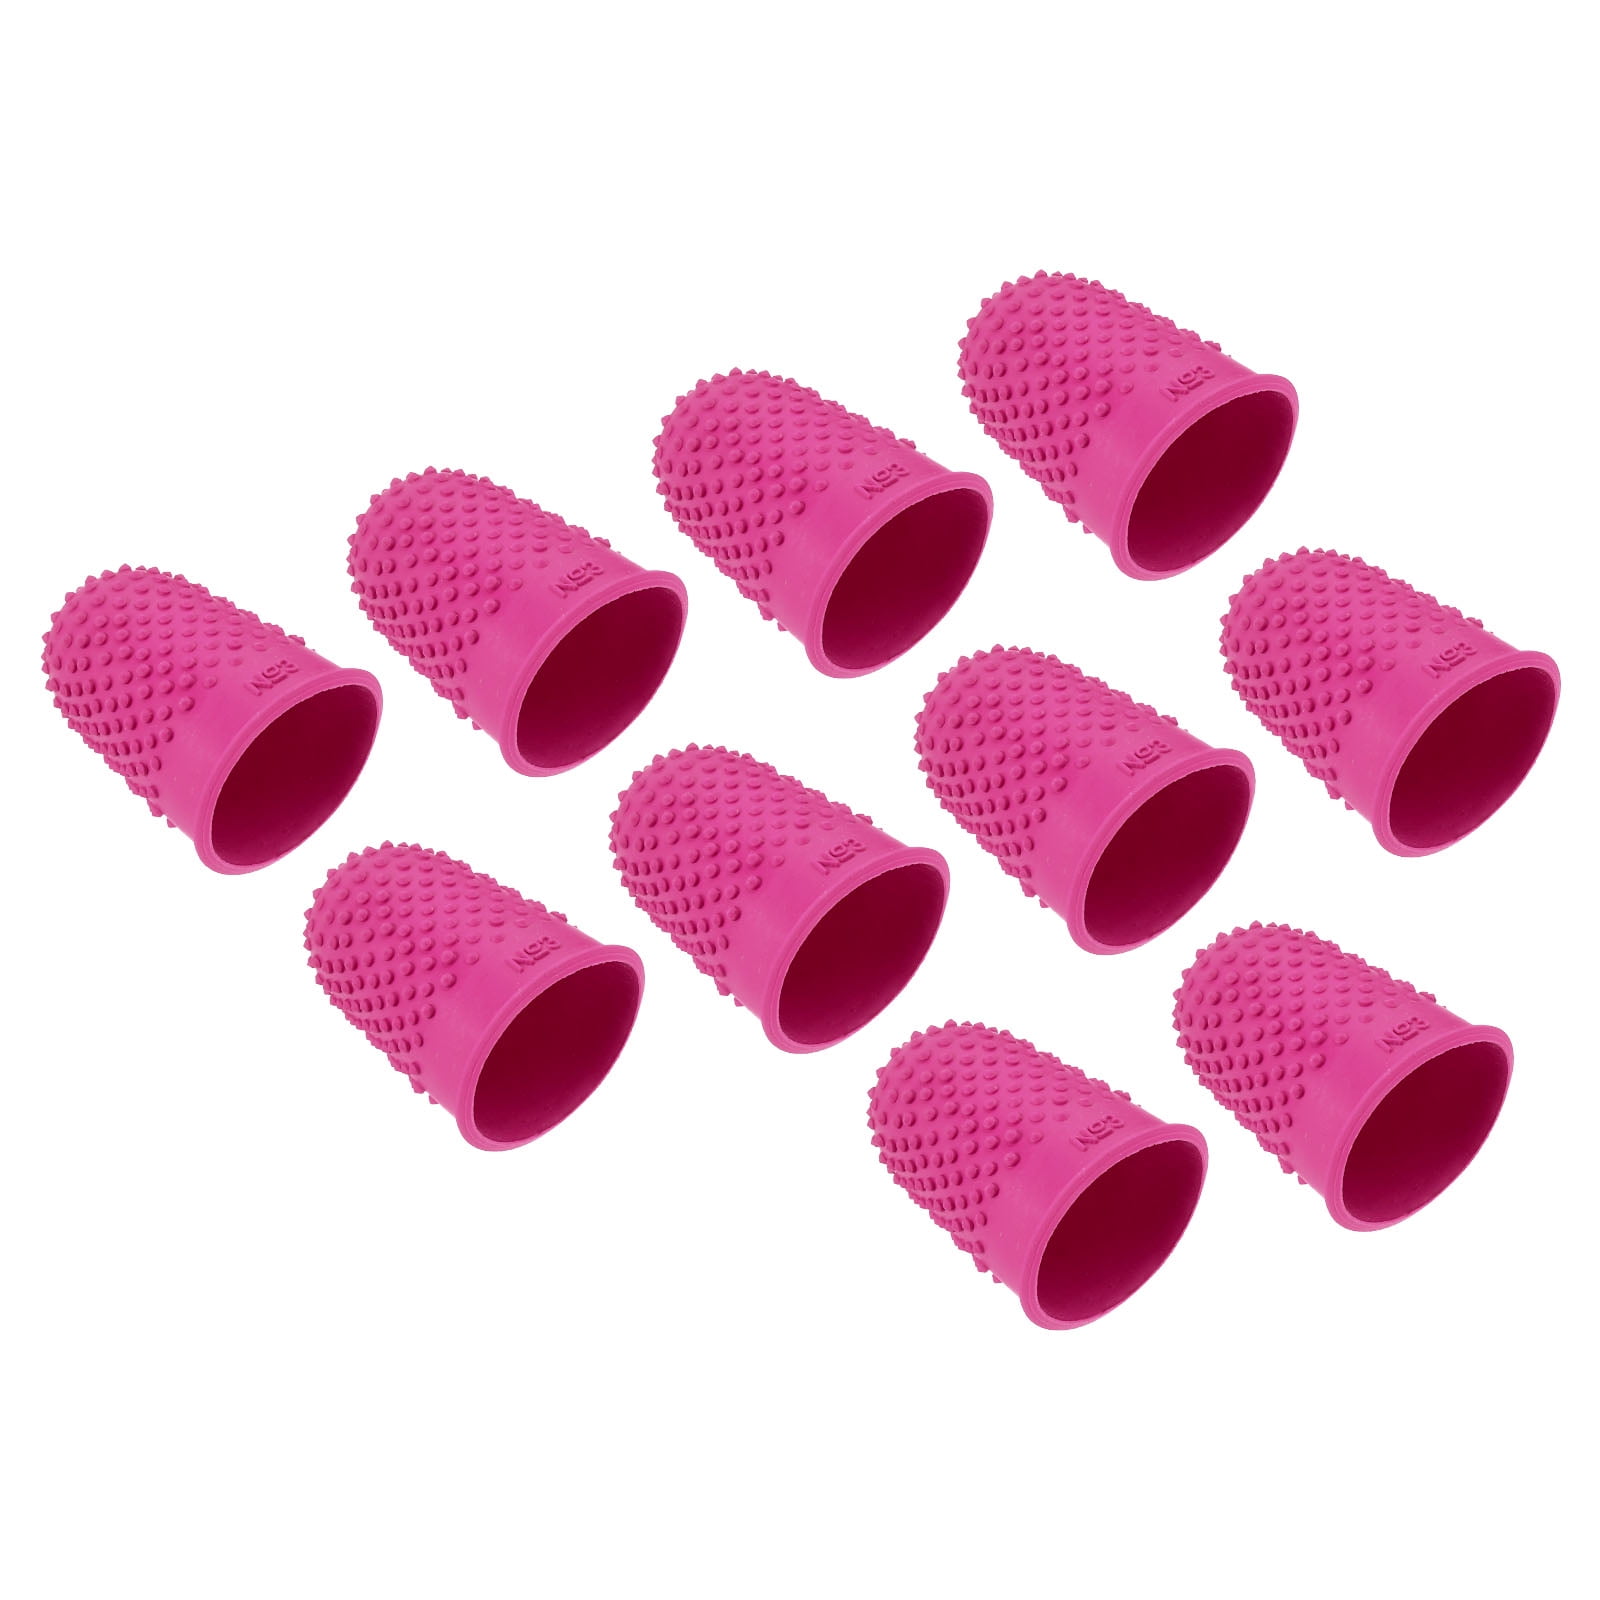 Uxcell Rubber Finger Tips Silicone Thumb Fingertip Protector Covers Guard  Pads Thimble Grips Rose Red XL Size 20 Pack 